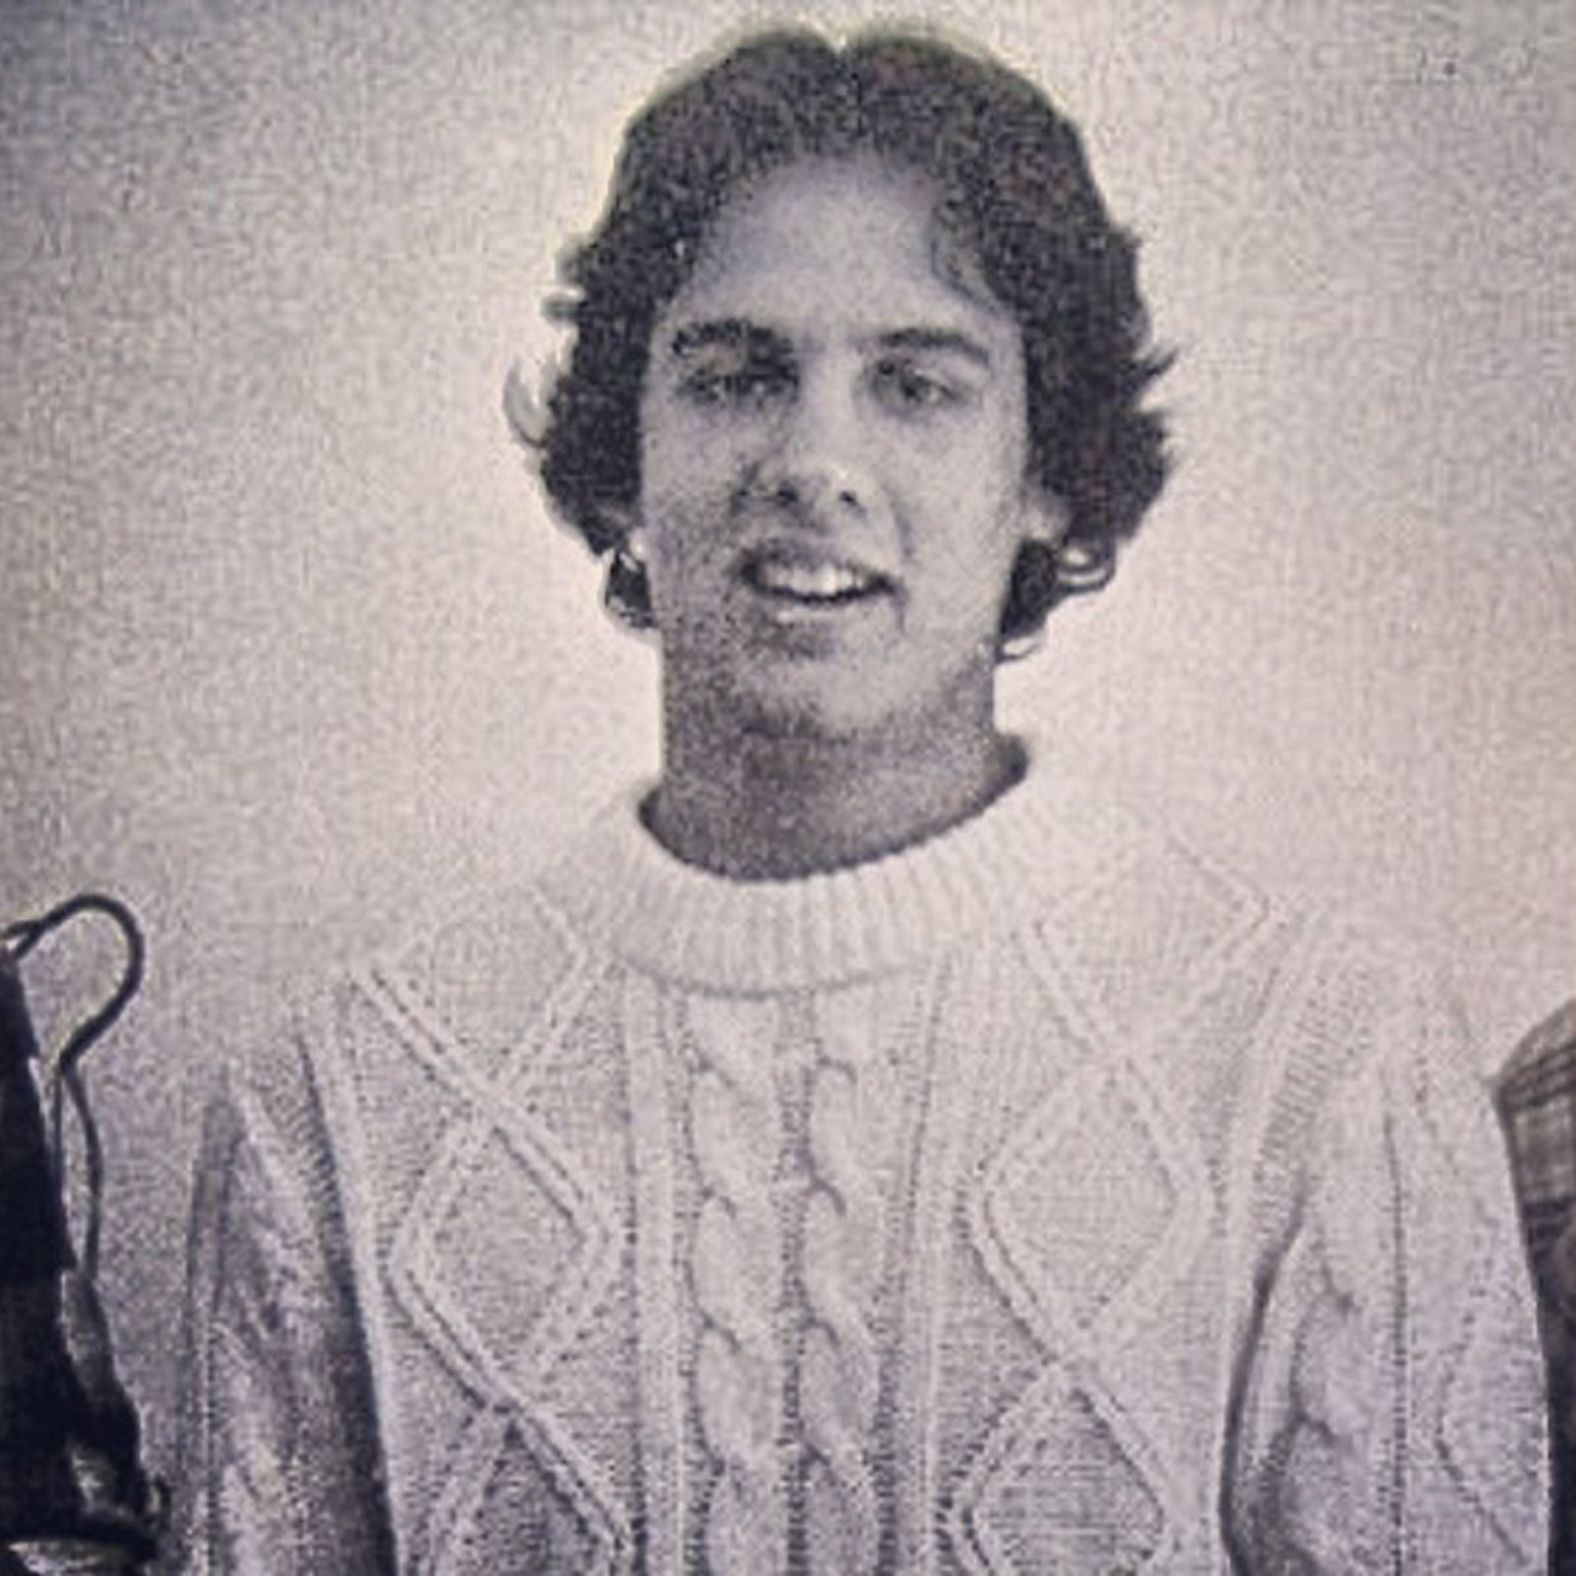 "A friend of mine from high school dug up this old pic - look at that sweater (and hair)!" <a href="index.php?page=&url=https%3A%2F%2Fwww.instagram.com%2Fp%2FdCvuBmTeia%2F" target="_blank" target="_blank">Christie wrote on Instagram</a>.